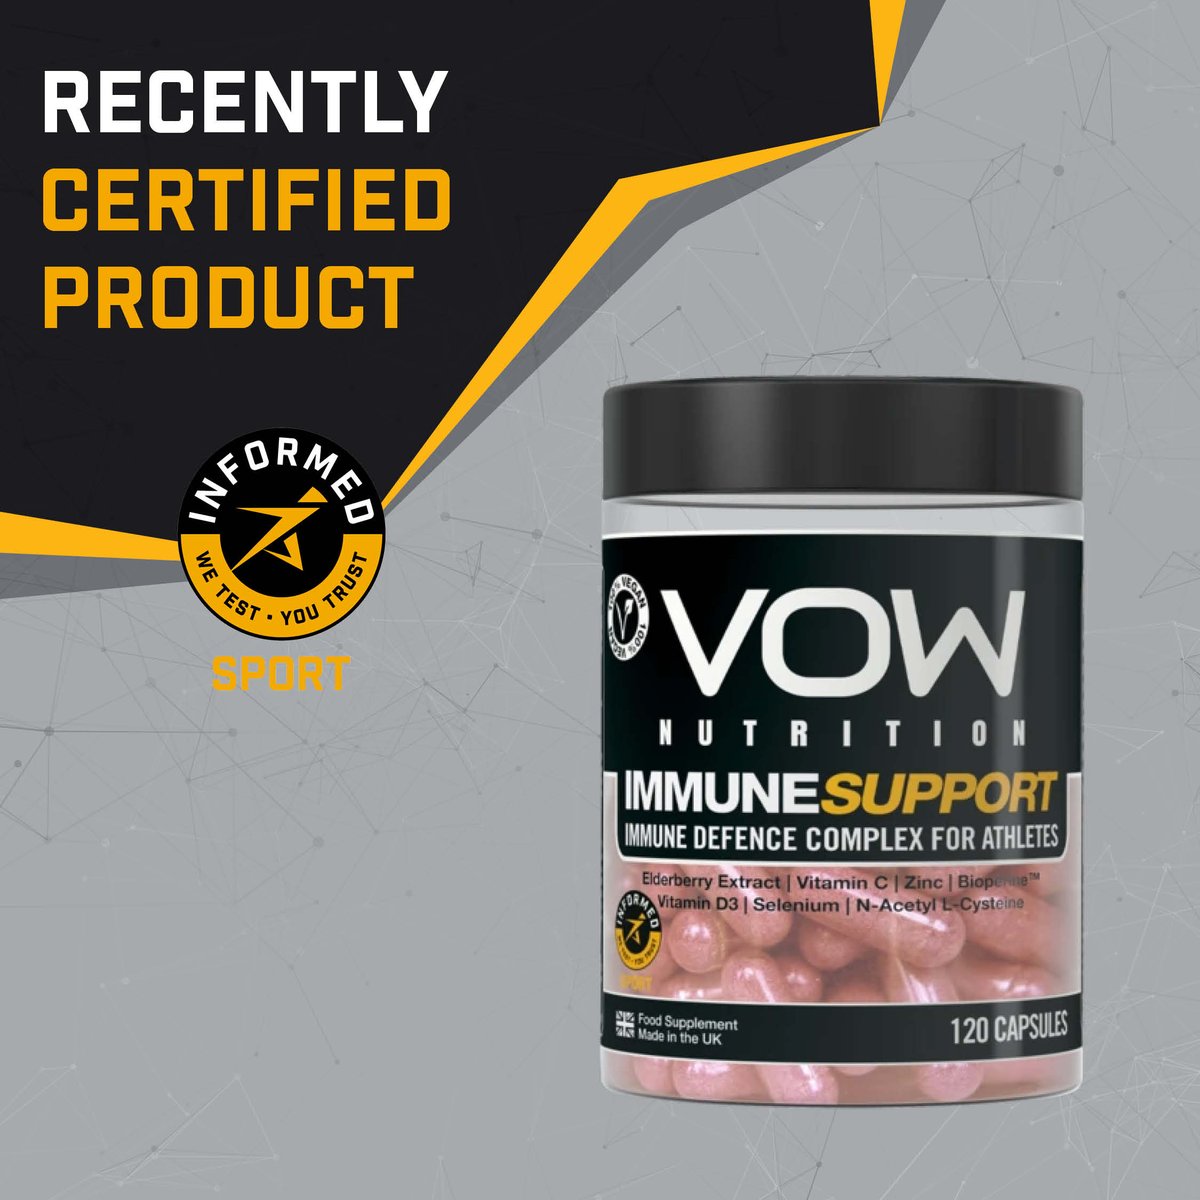 Congrats @vow_nutrition on the Informed Sport Certification of Immune Support. Every batch of this product is pre-market tested for banned substances - providing assurance to athletes! #wetestyoutrust #InformedSport #VowNutrition